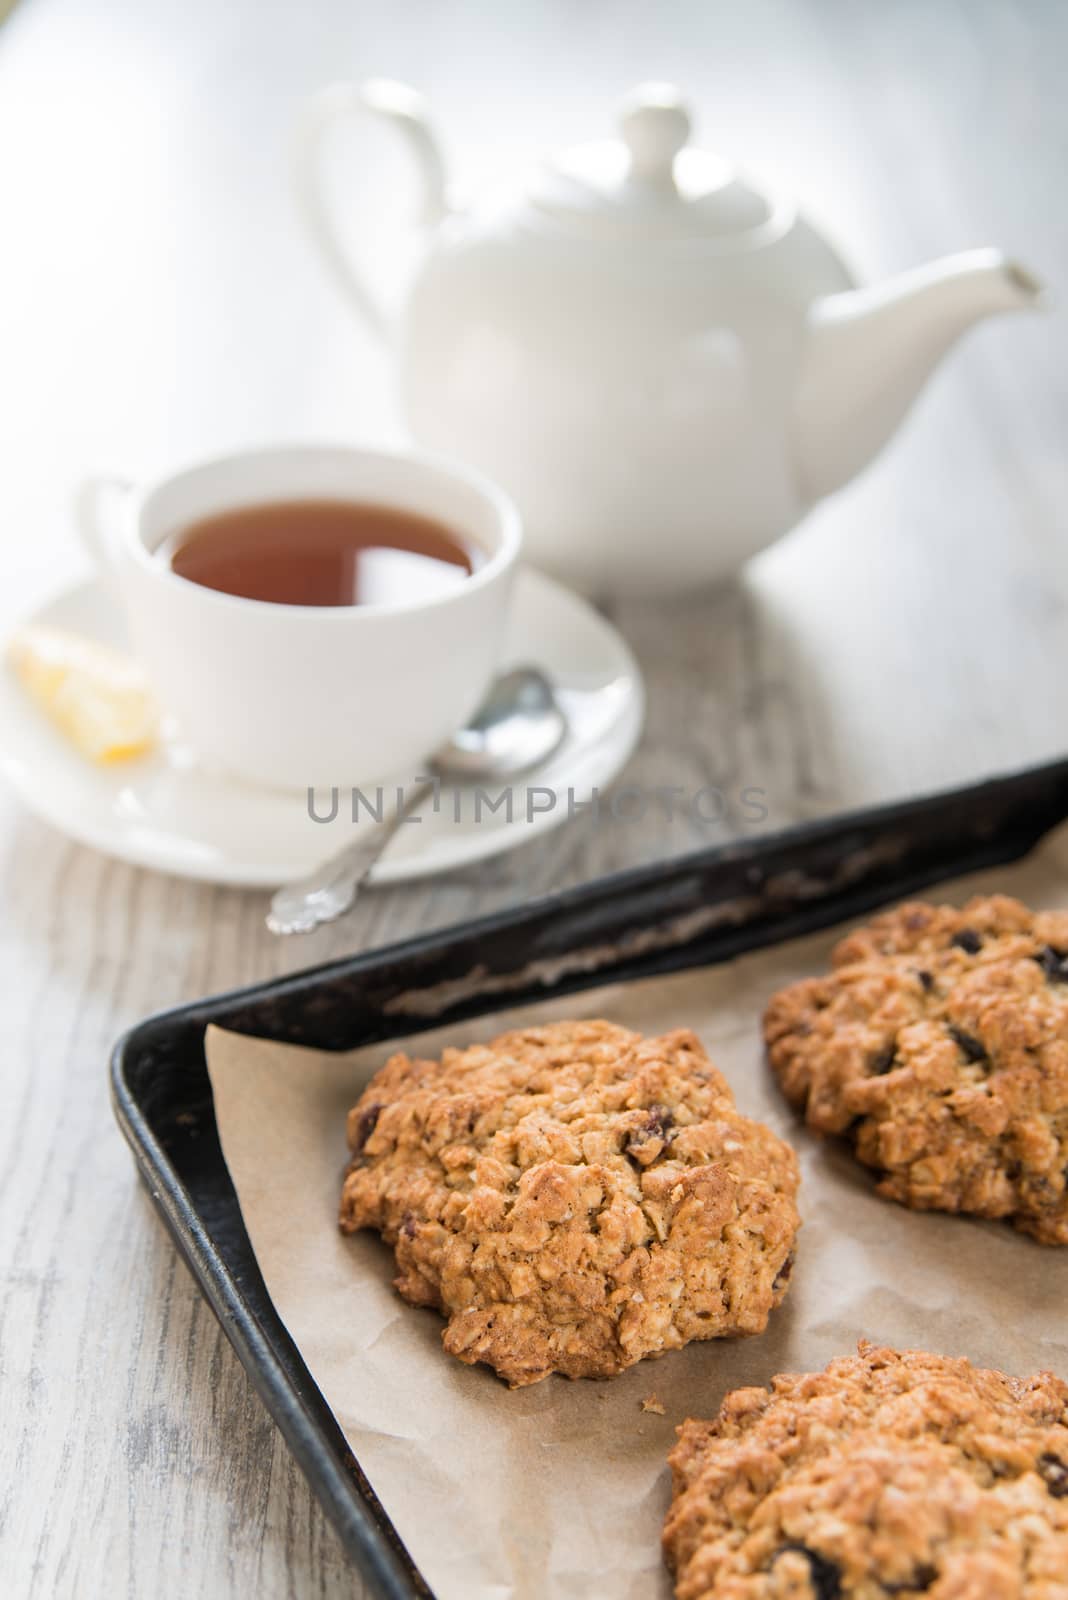 Tea with the oatmeal cookies on the baking dish